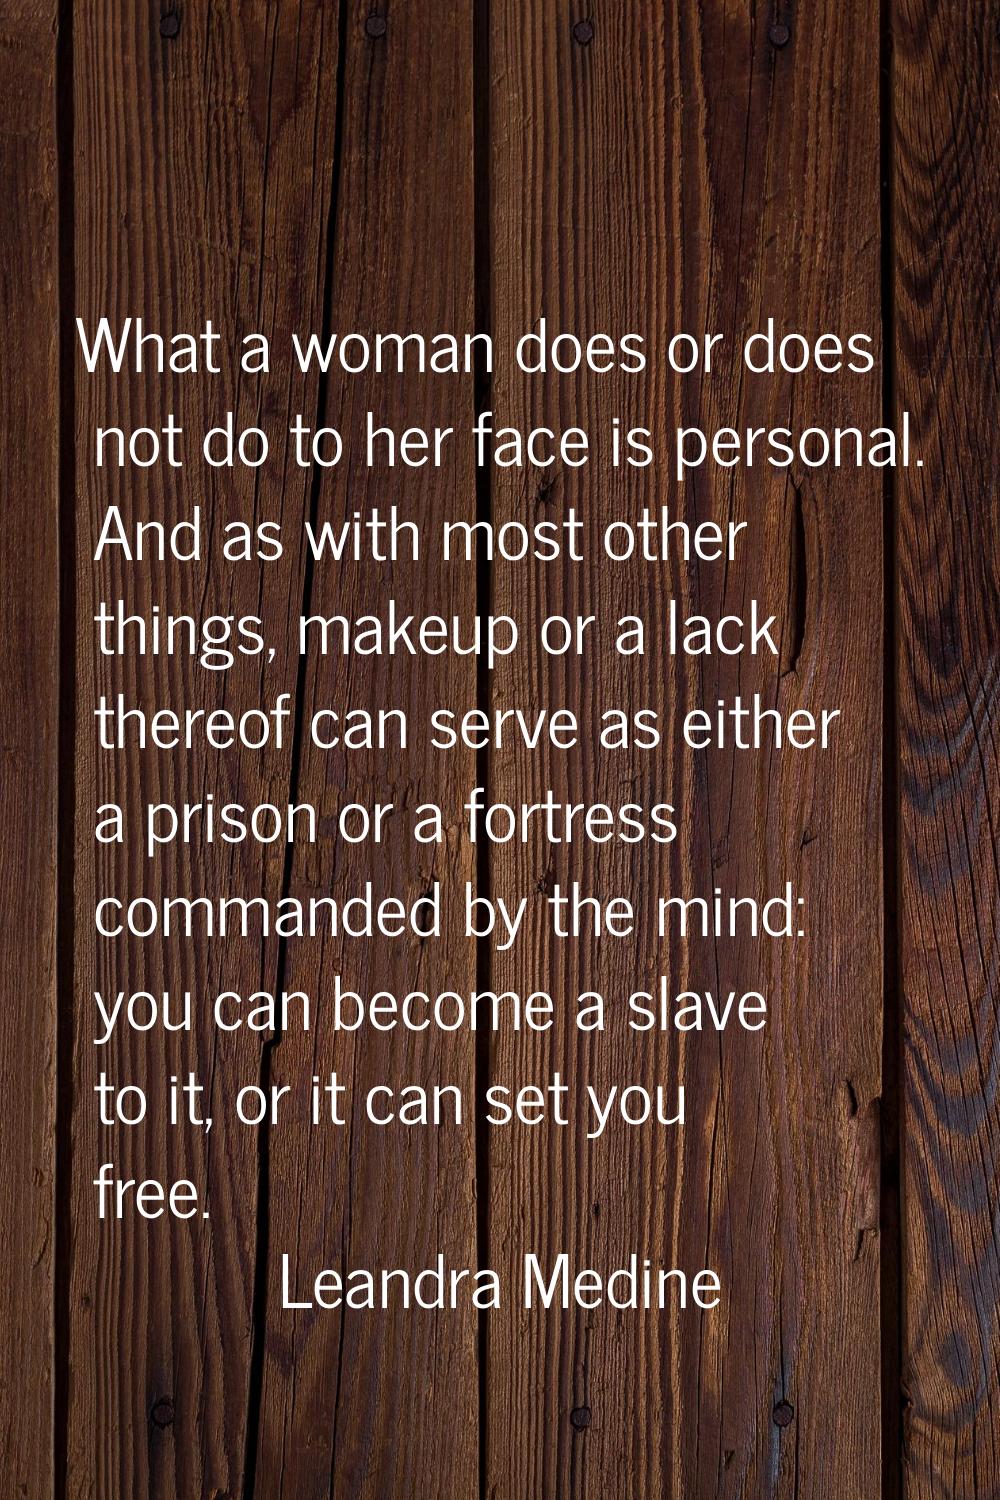 What a woman does or does not do to her face is personal. And as with most other things, makeup or 